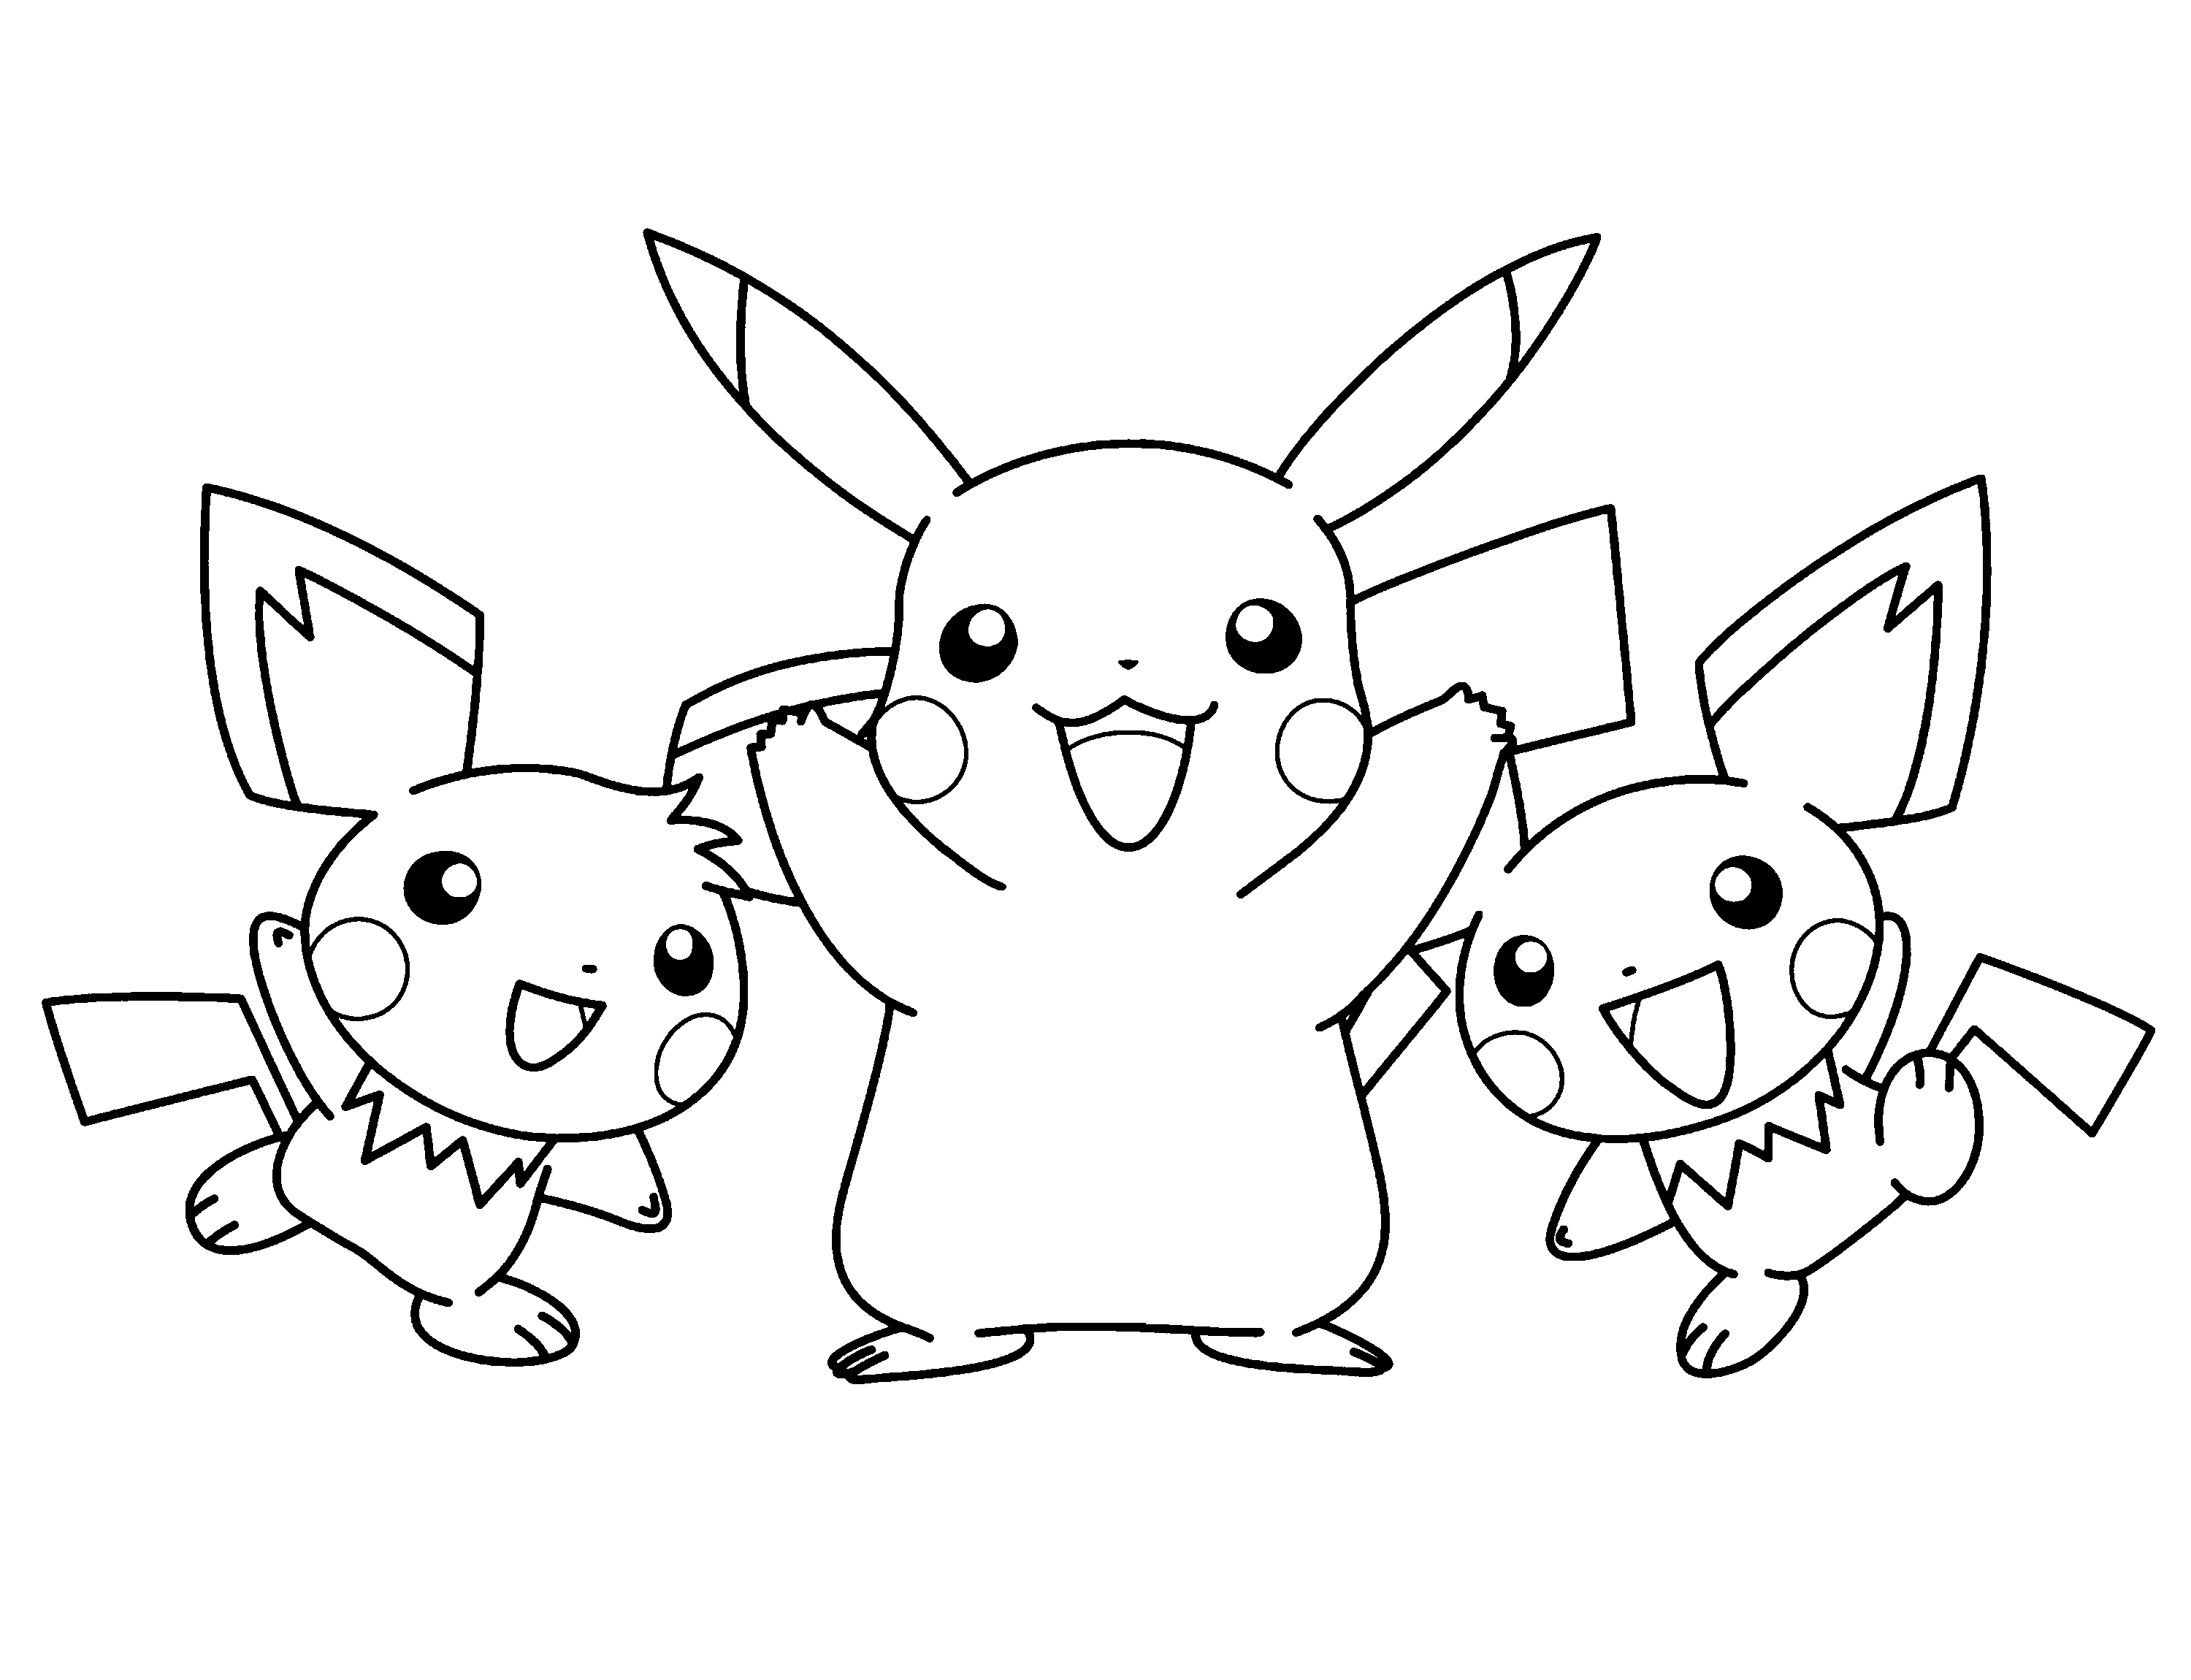  Pokemon coloring pages | Kids coloring pages | #10